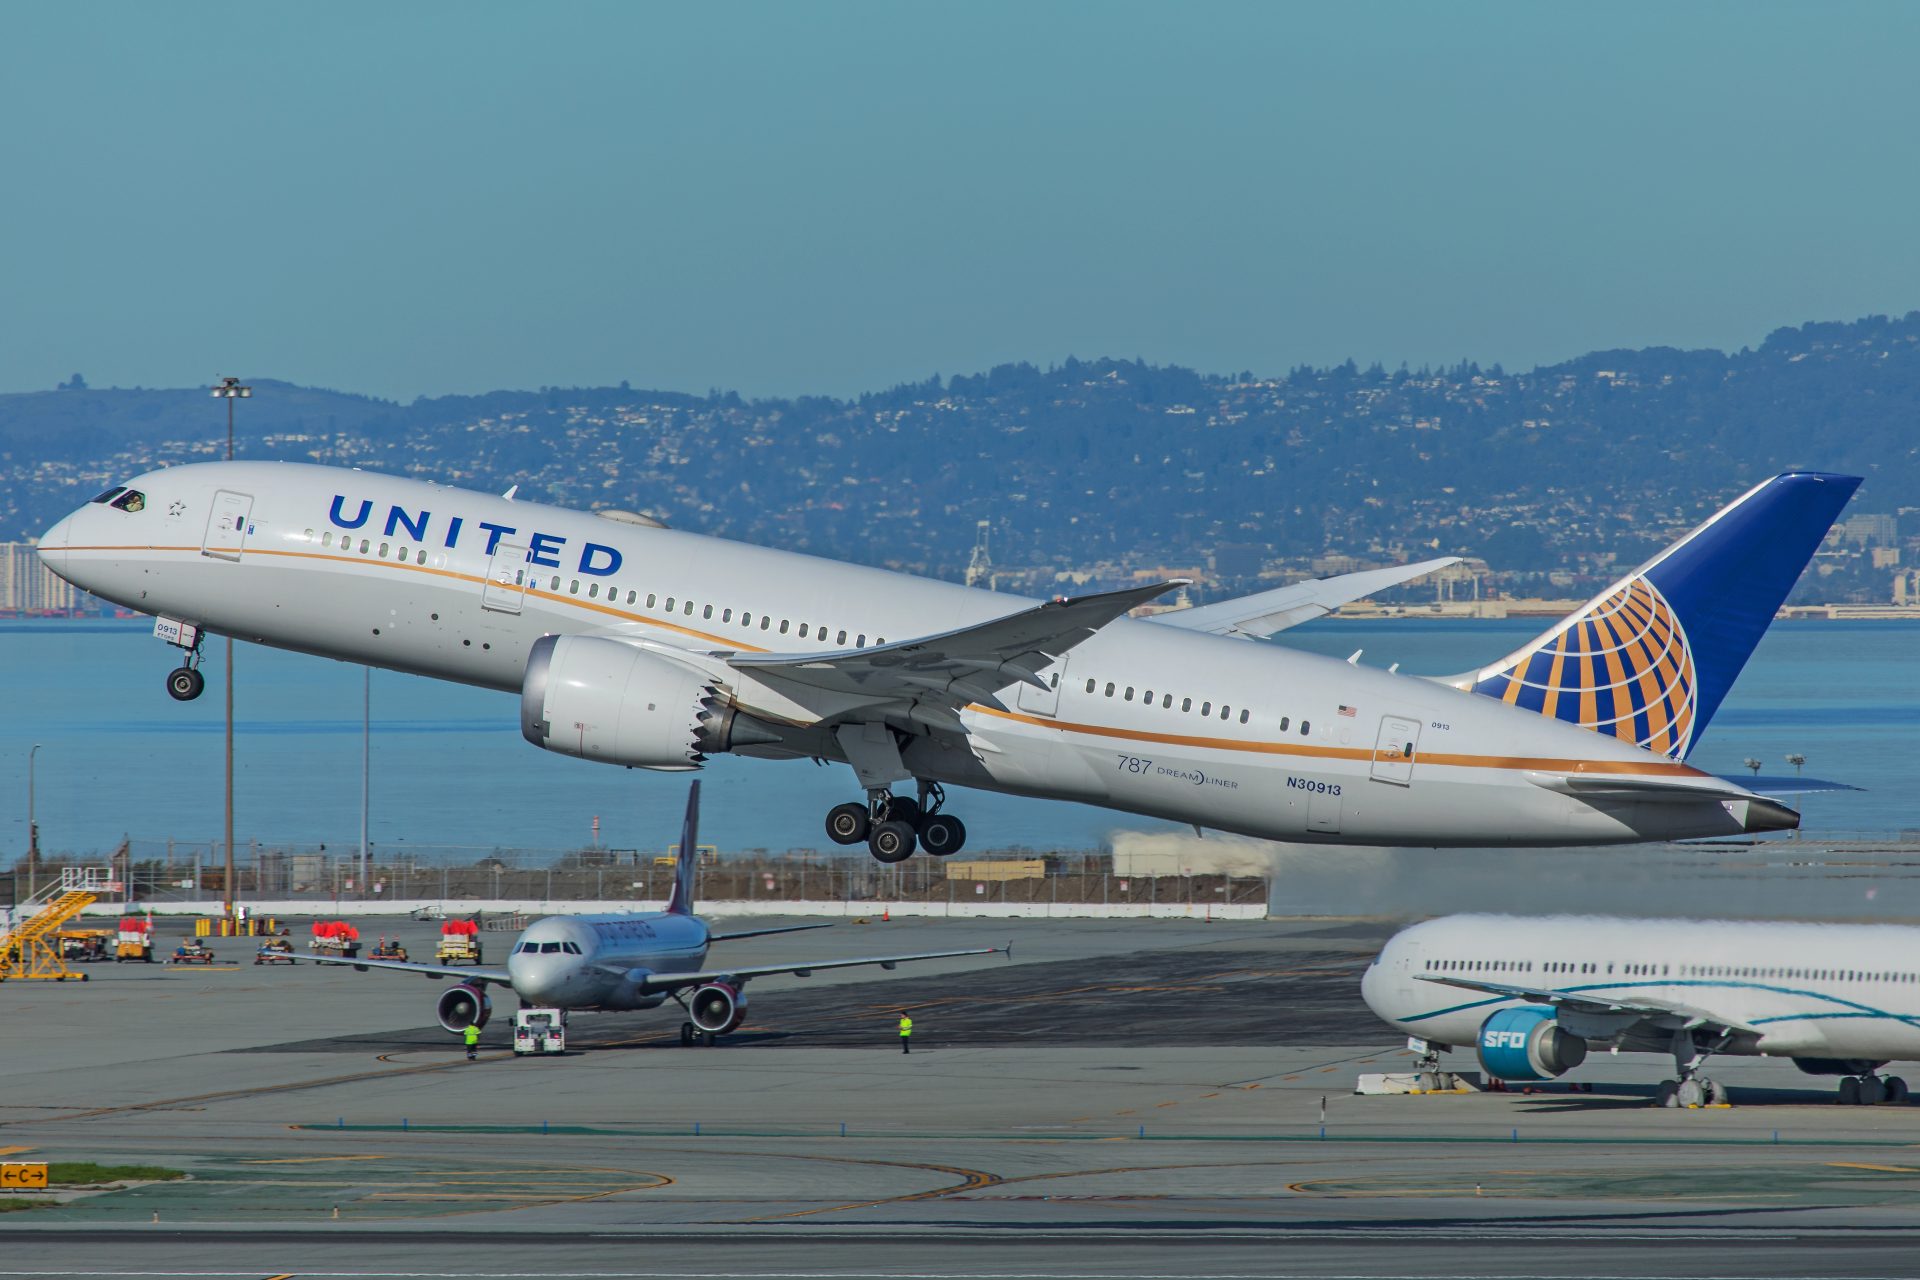 United Airlines departure from Chicago to Washington will get avionics history